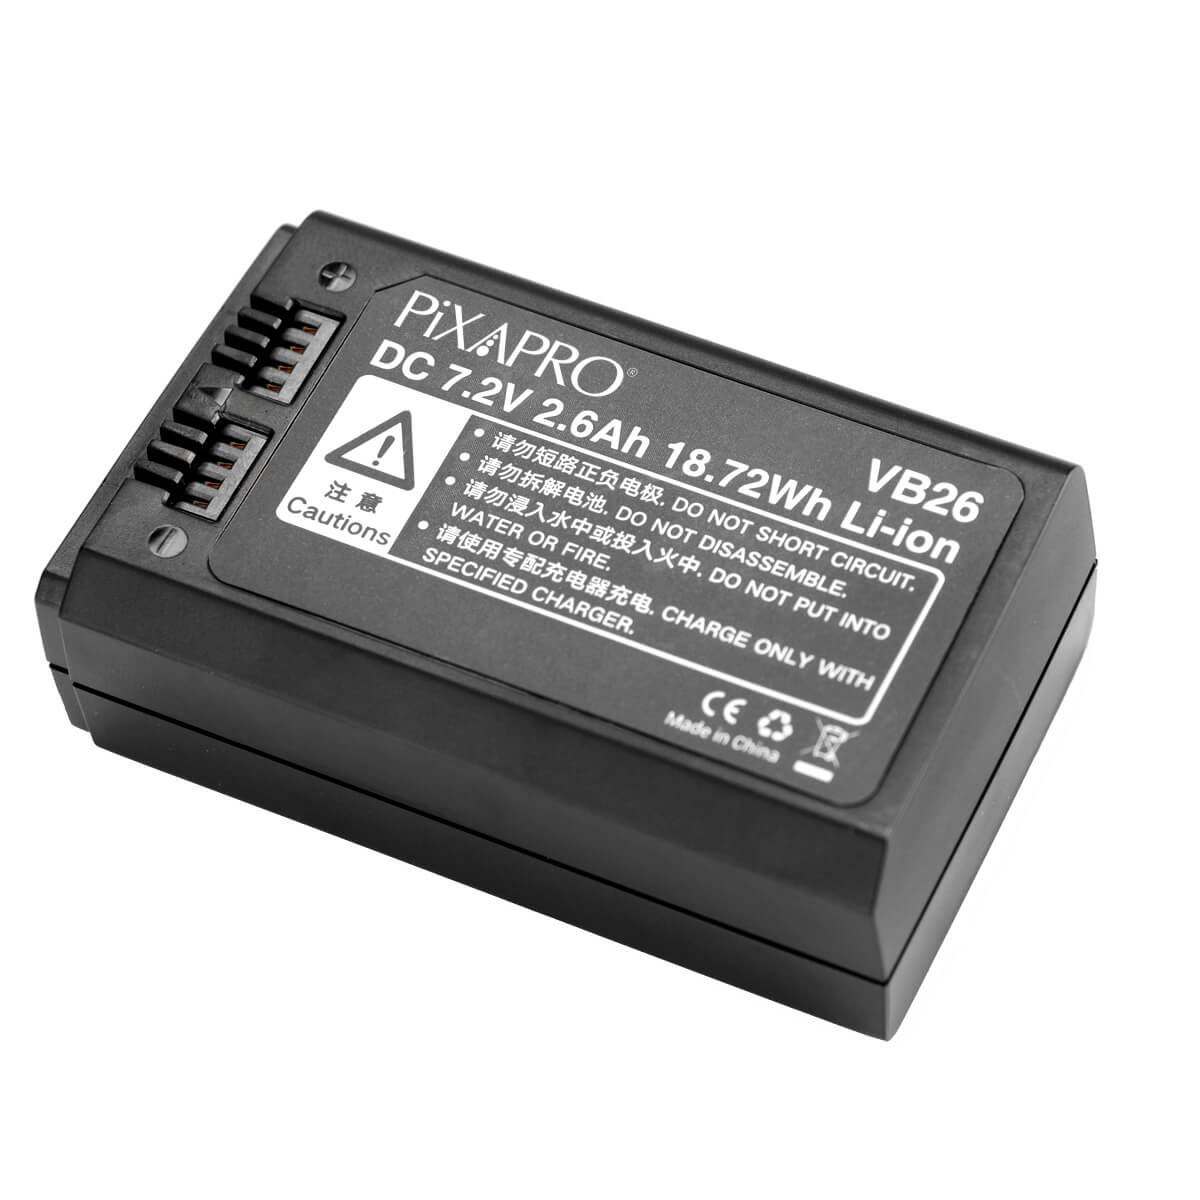 VB26 7.2V Lithium-Ion Spare Battery for GIO1 and Li-ion580III 